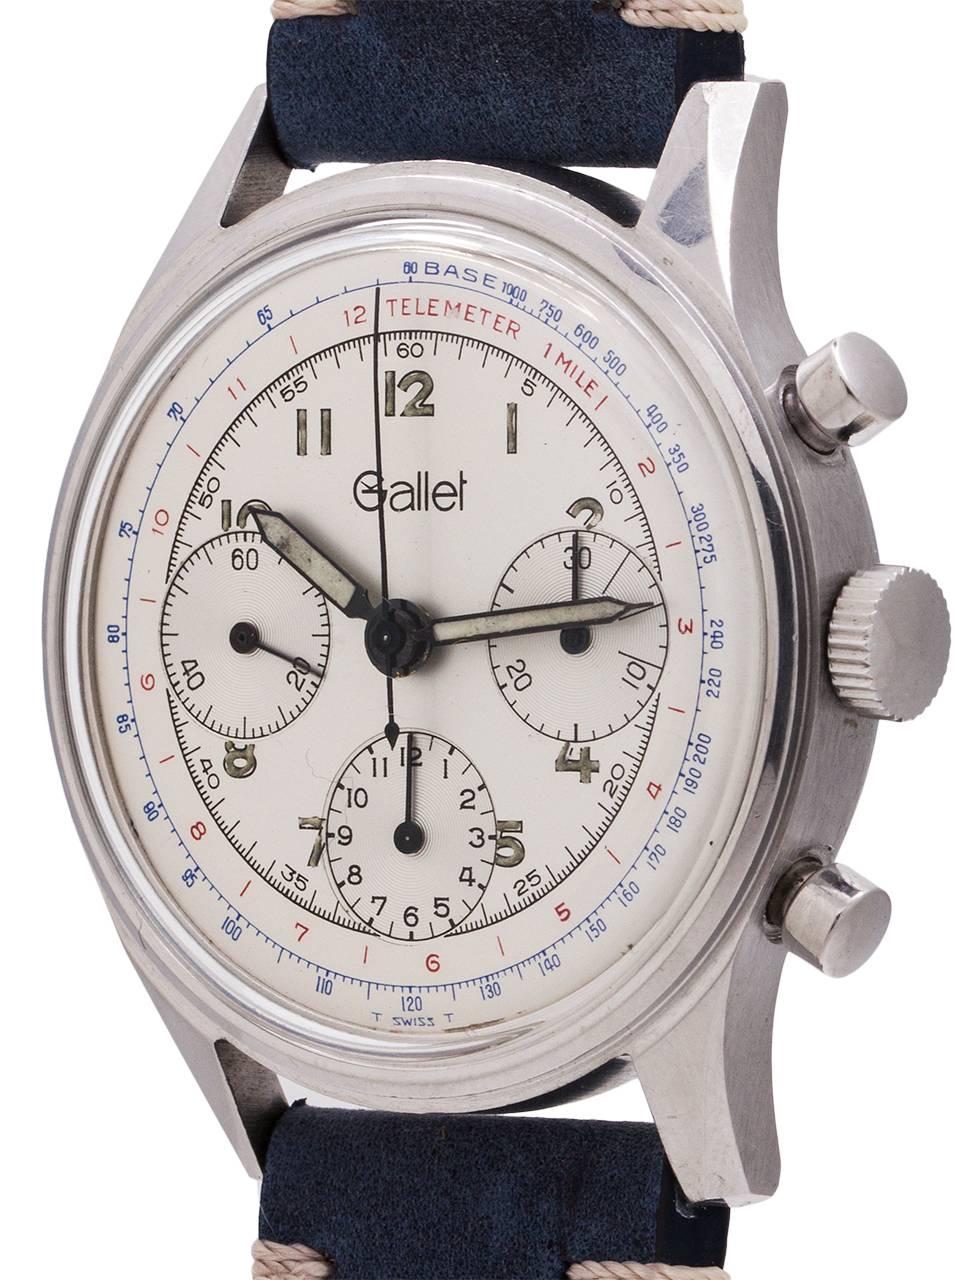 
An exceptionally nice condition original owner vintage Gallet stainless steel case 3 registers manual wind chronograph with original dial with tachometer and telemeter scales. Featuring a 37mm diameter stainless steel case with sharp beveled lugs